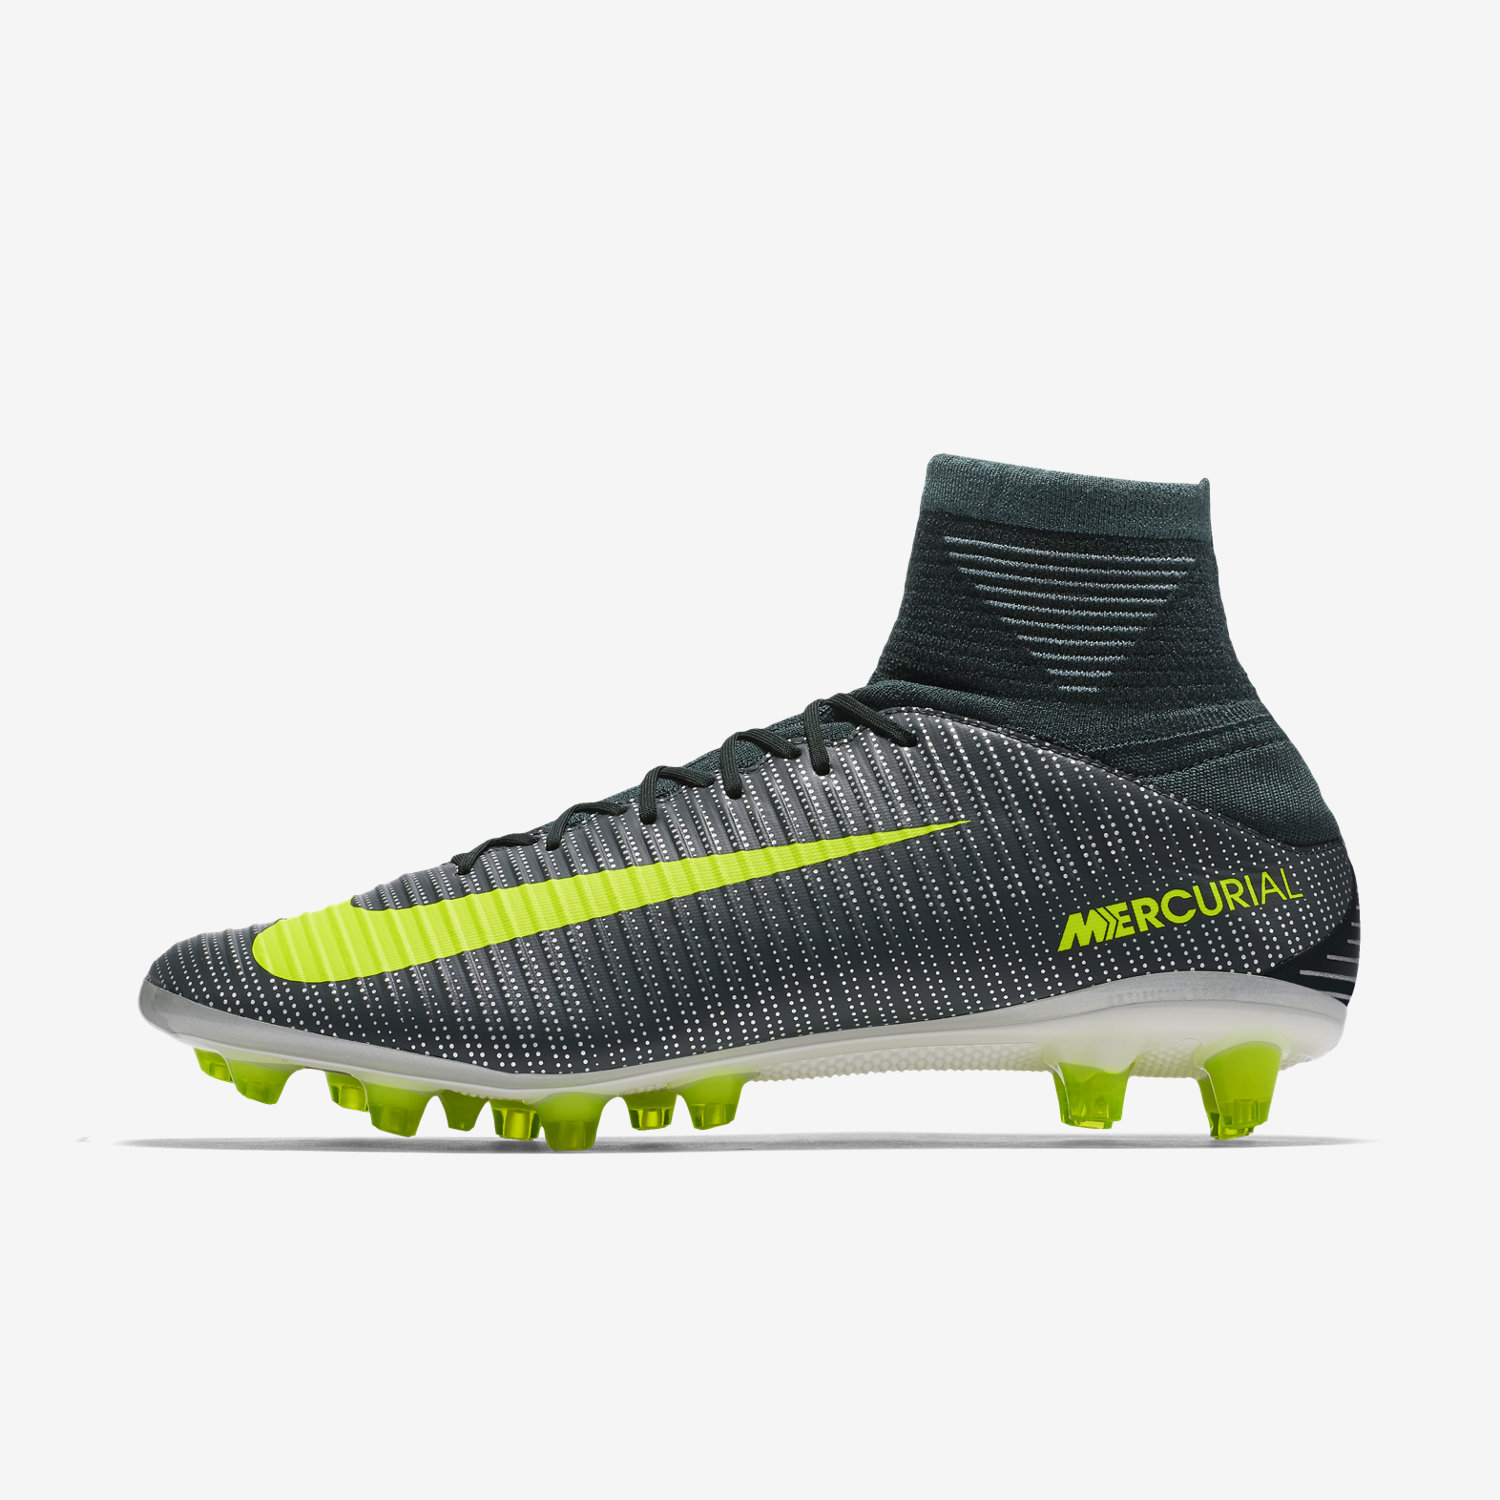 Nike Mercurial Veloce III Dynamic Fit CR7 AG-PRO - Men's Artificial-Grass Football Boot